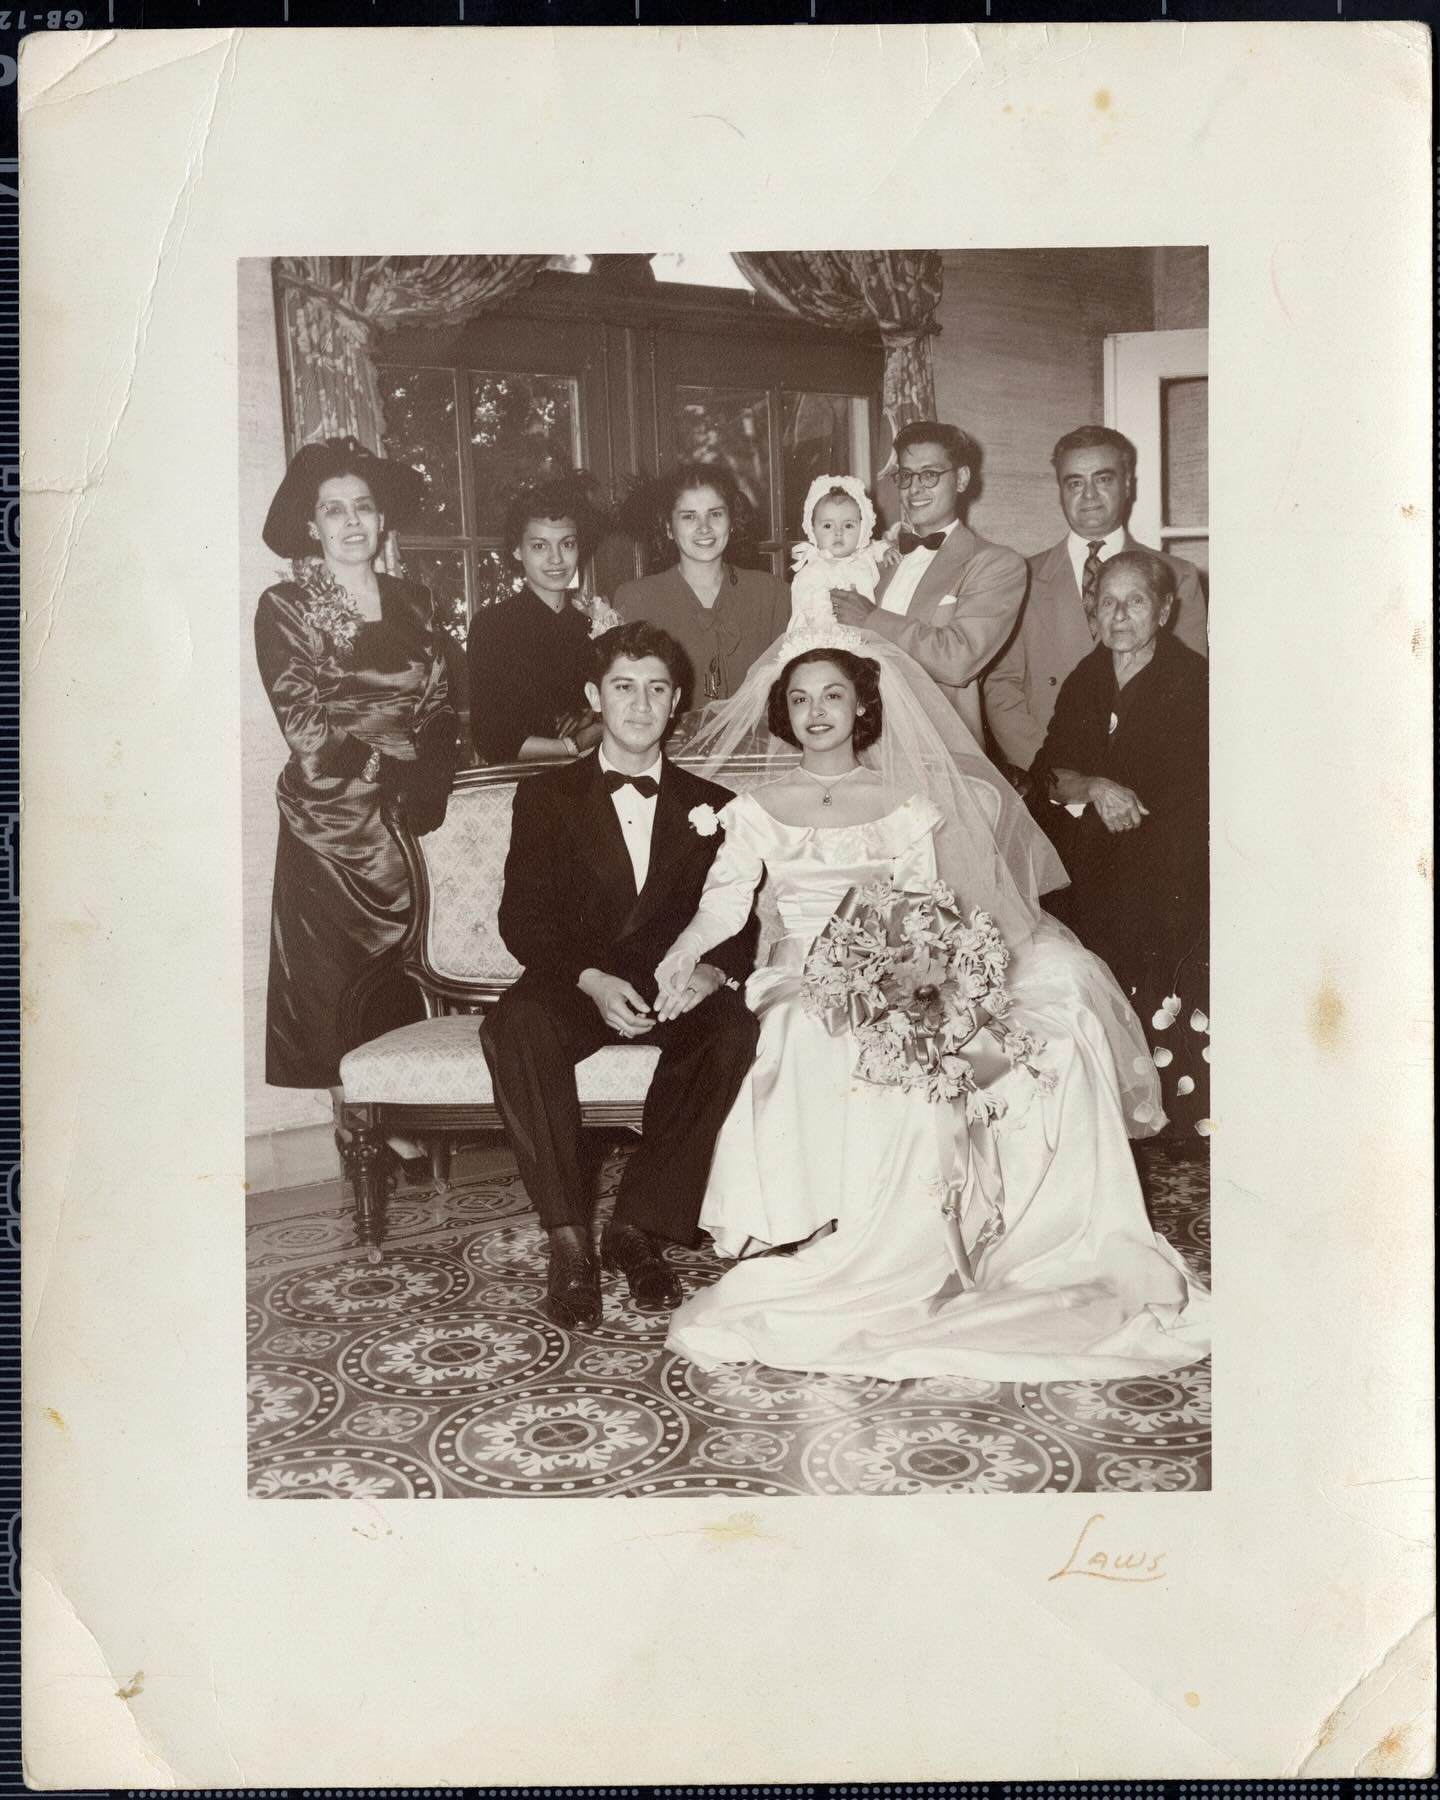 This is my aunt Margie&rsquo;s wedding photo. I have always loved and cherished it since I inherited it. I never realized it would be some of the most important chronology for the rest of my research. The fact that this woman, my grandmother&rsquo;s 